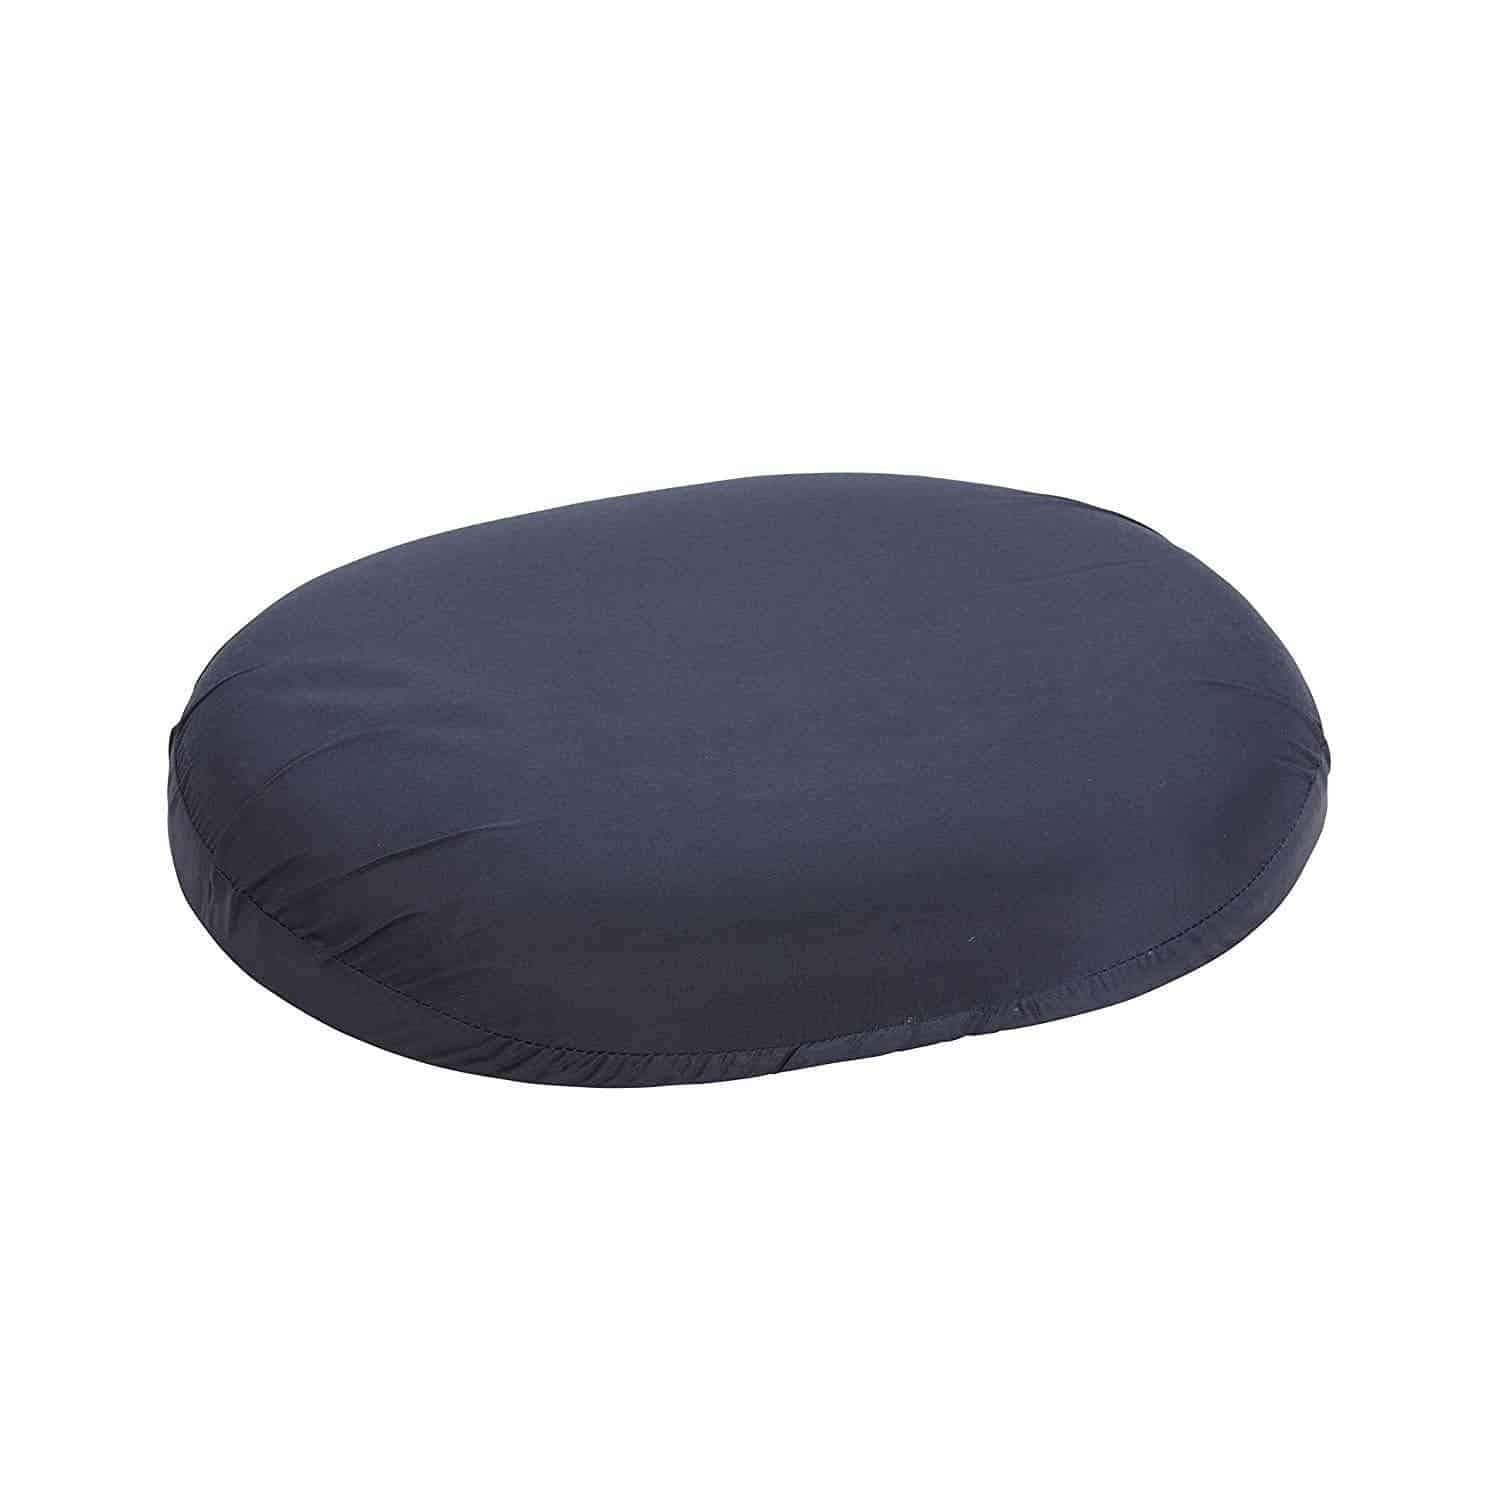 DMI Molded Foam Ring Donut Seat Cushions For Hemmoroids and Back Pain Relief - Senior.com Cushions